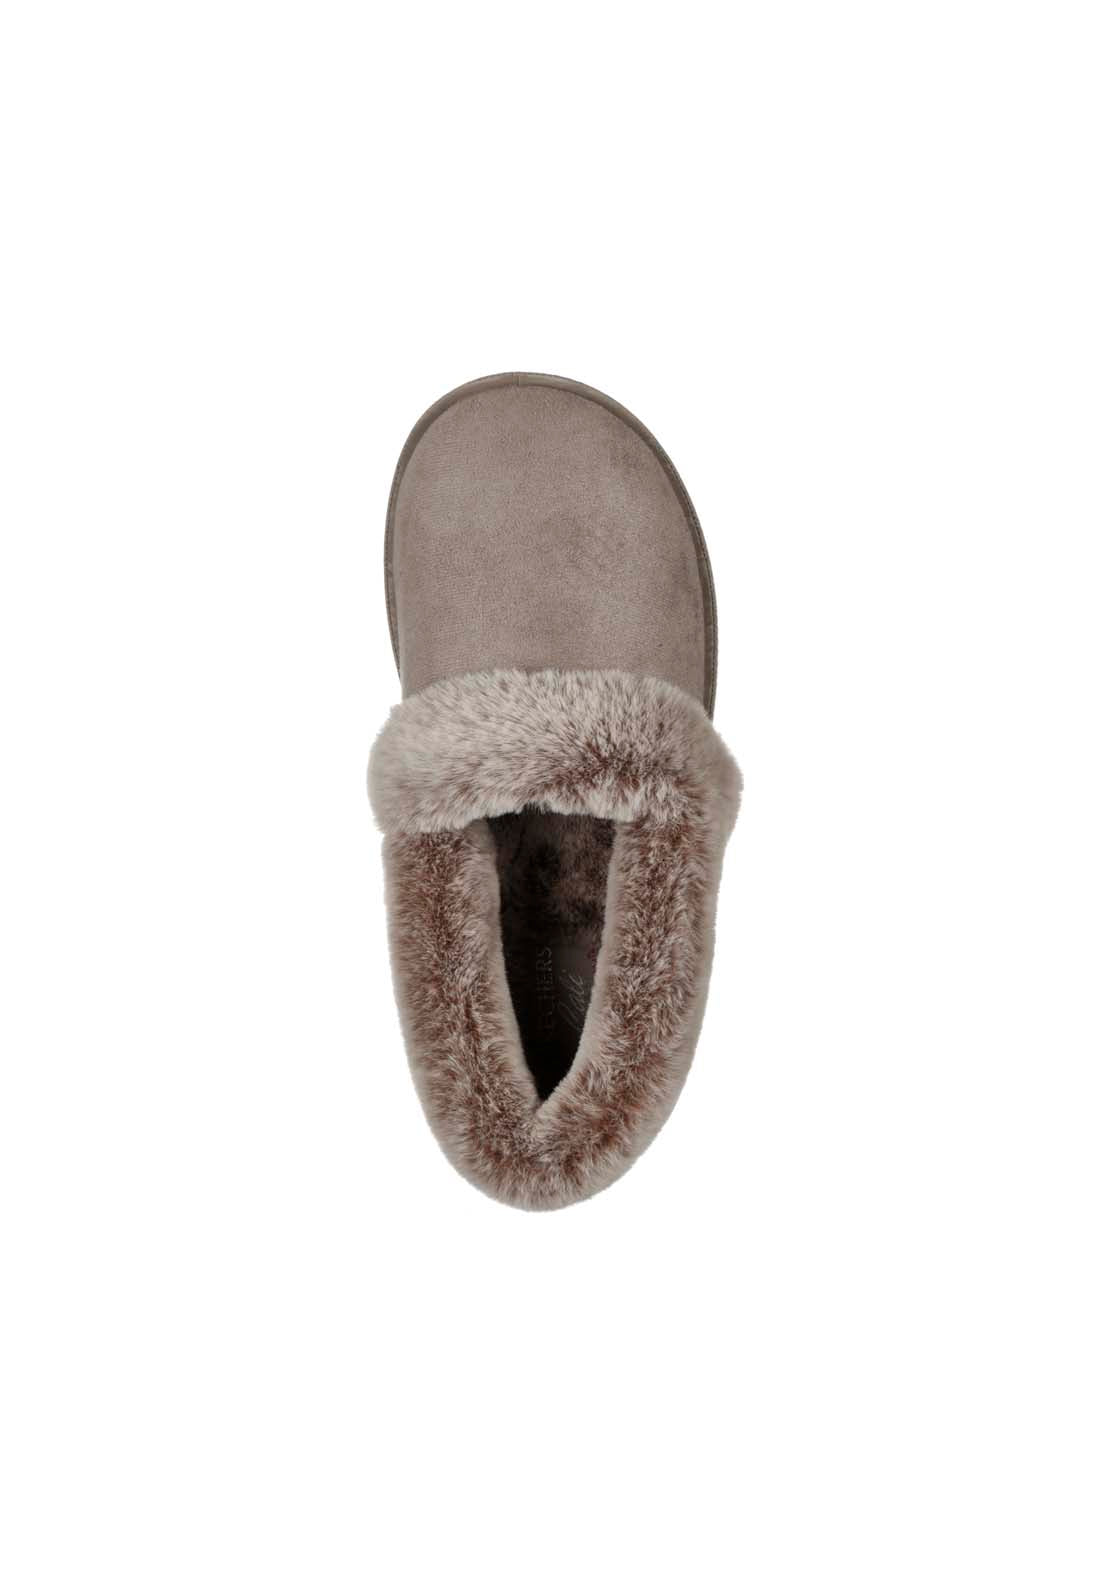 Skechers Cosy Campfire Slipper - Taupe 2 Shaws Department Stores